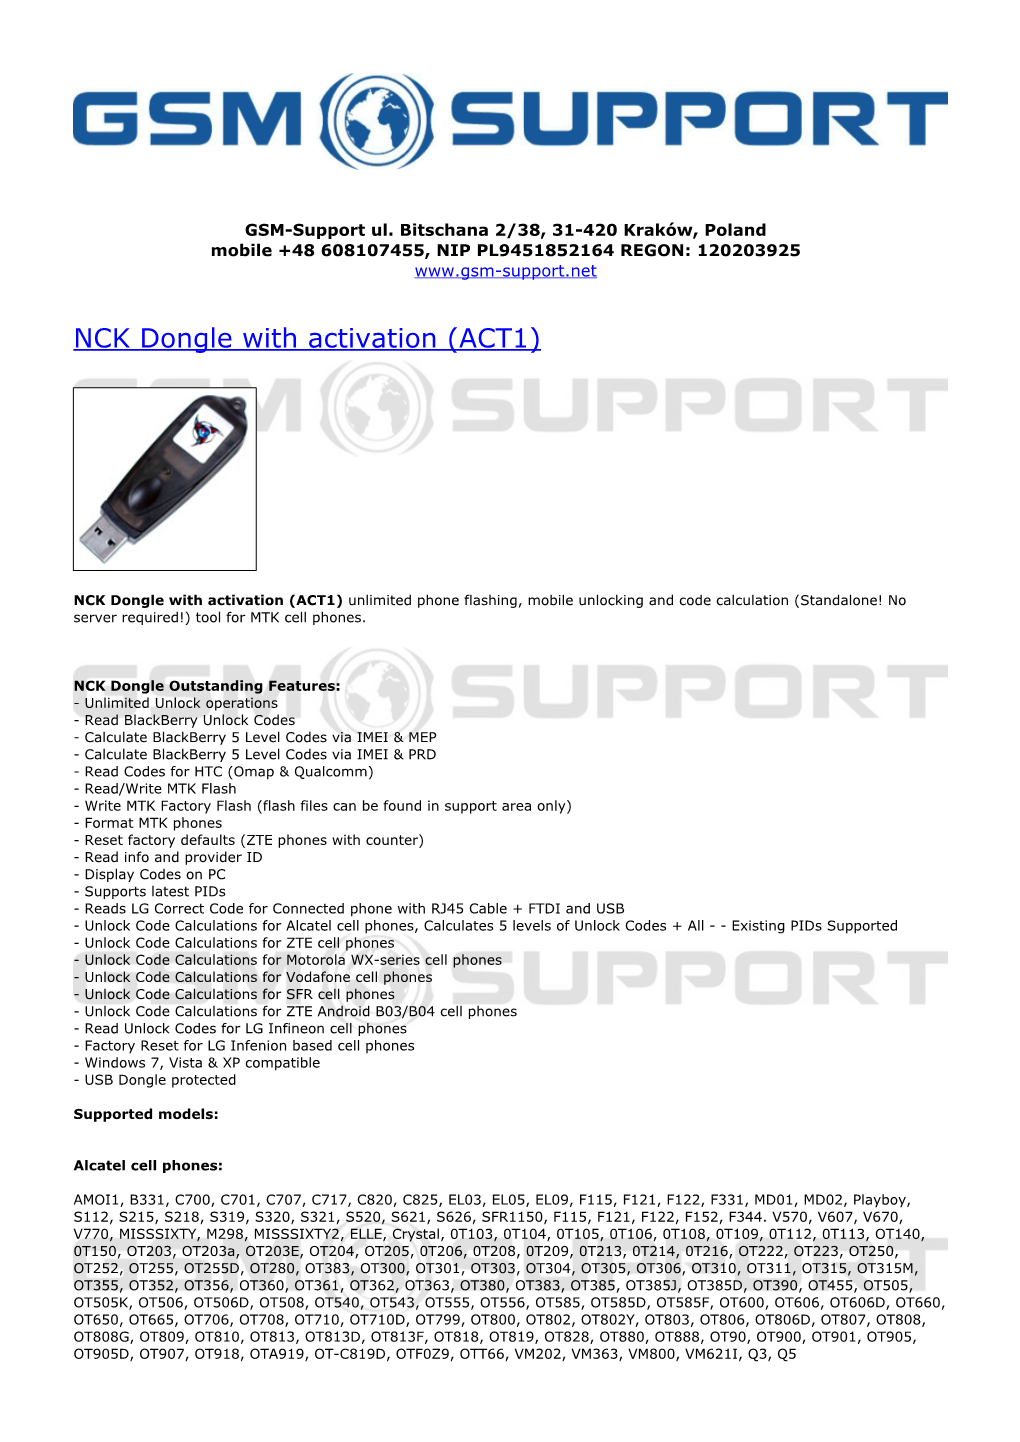 NCK Dongle with Activation (ACT1)